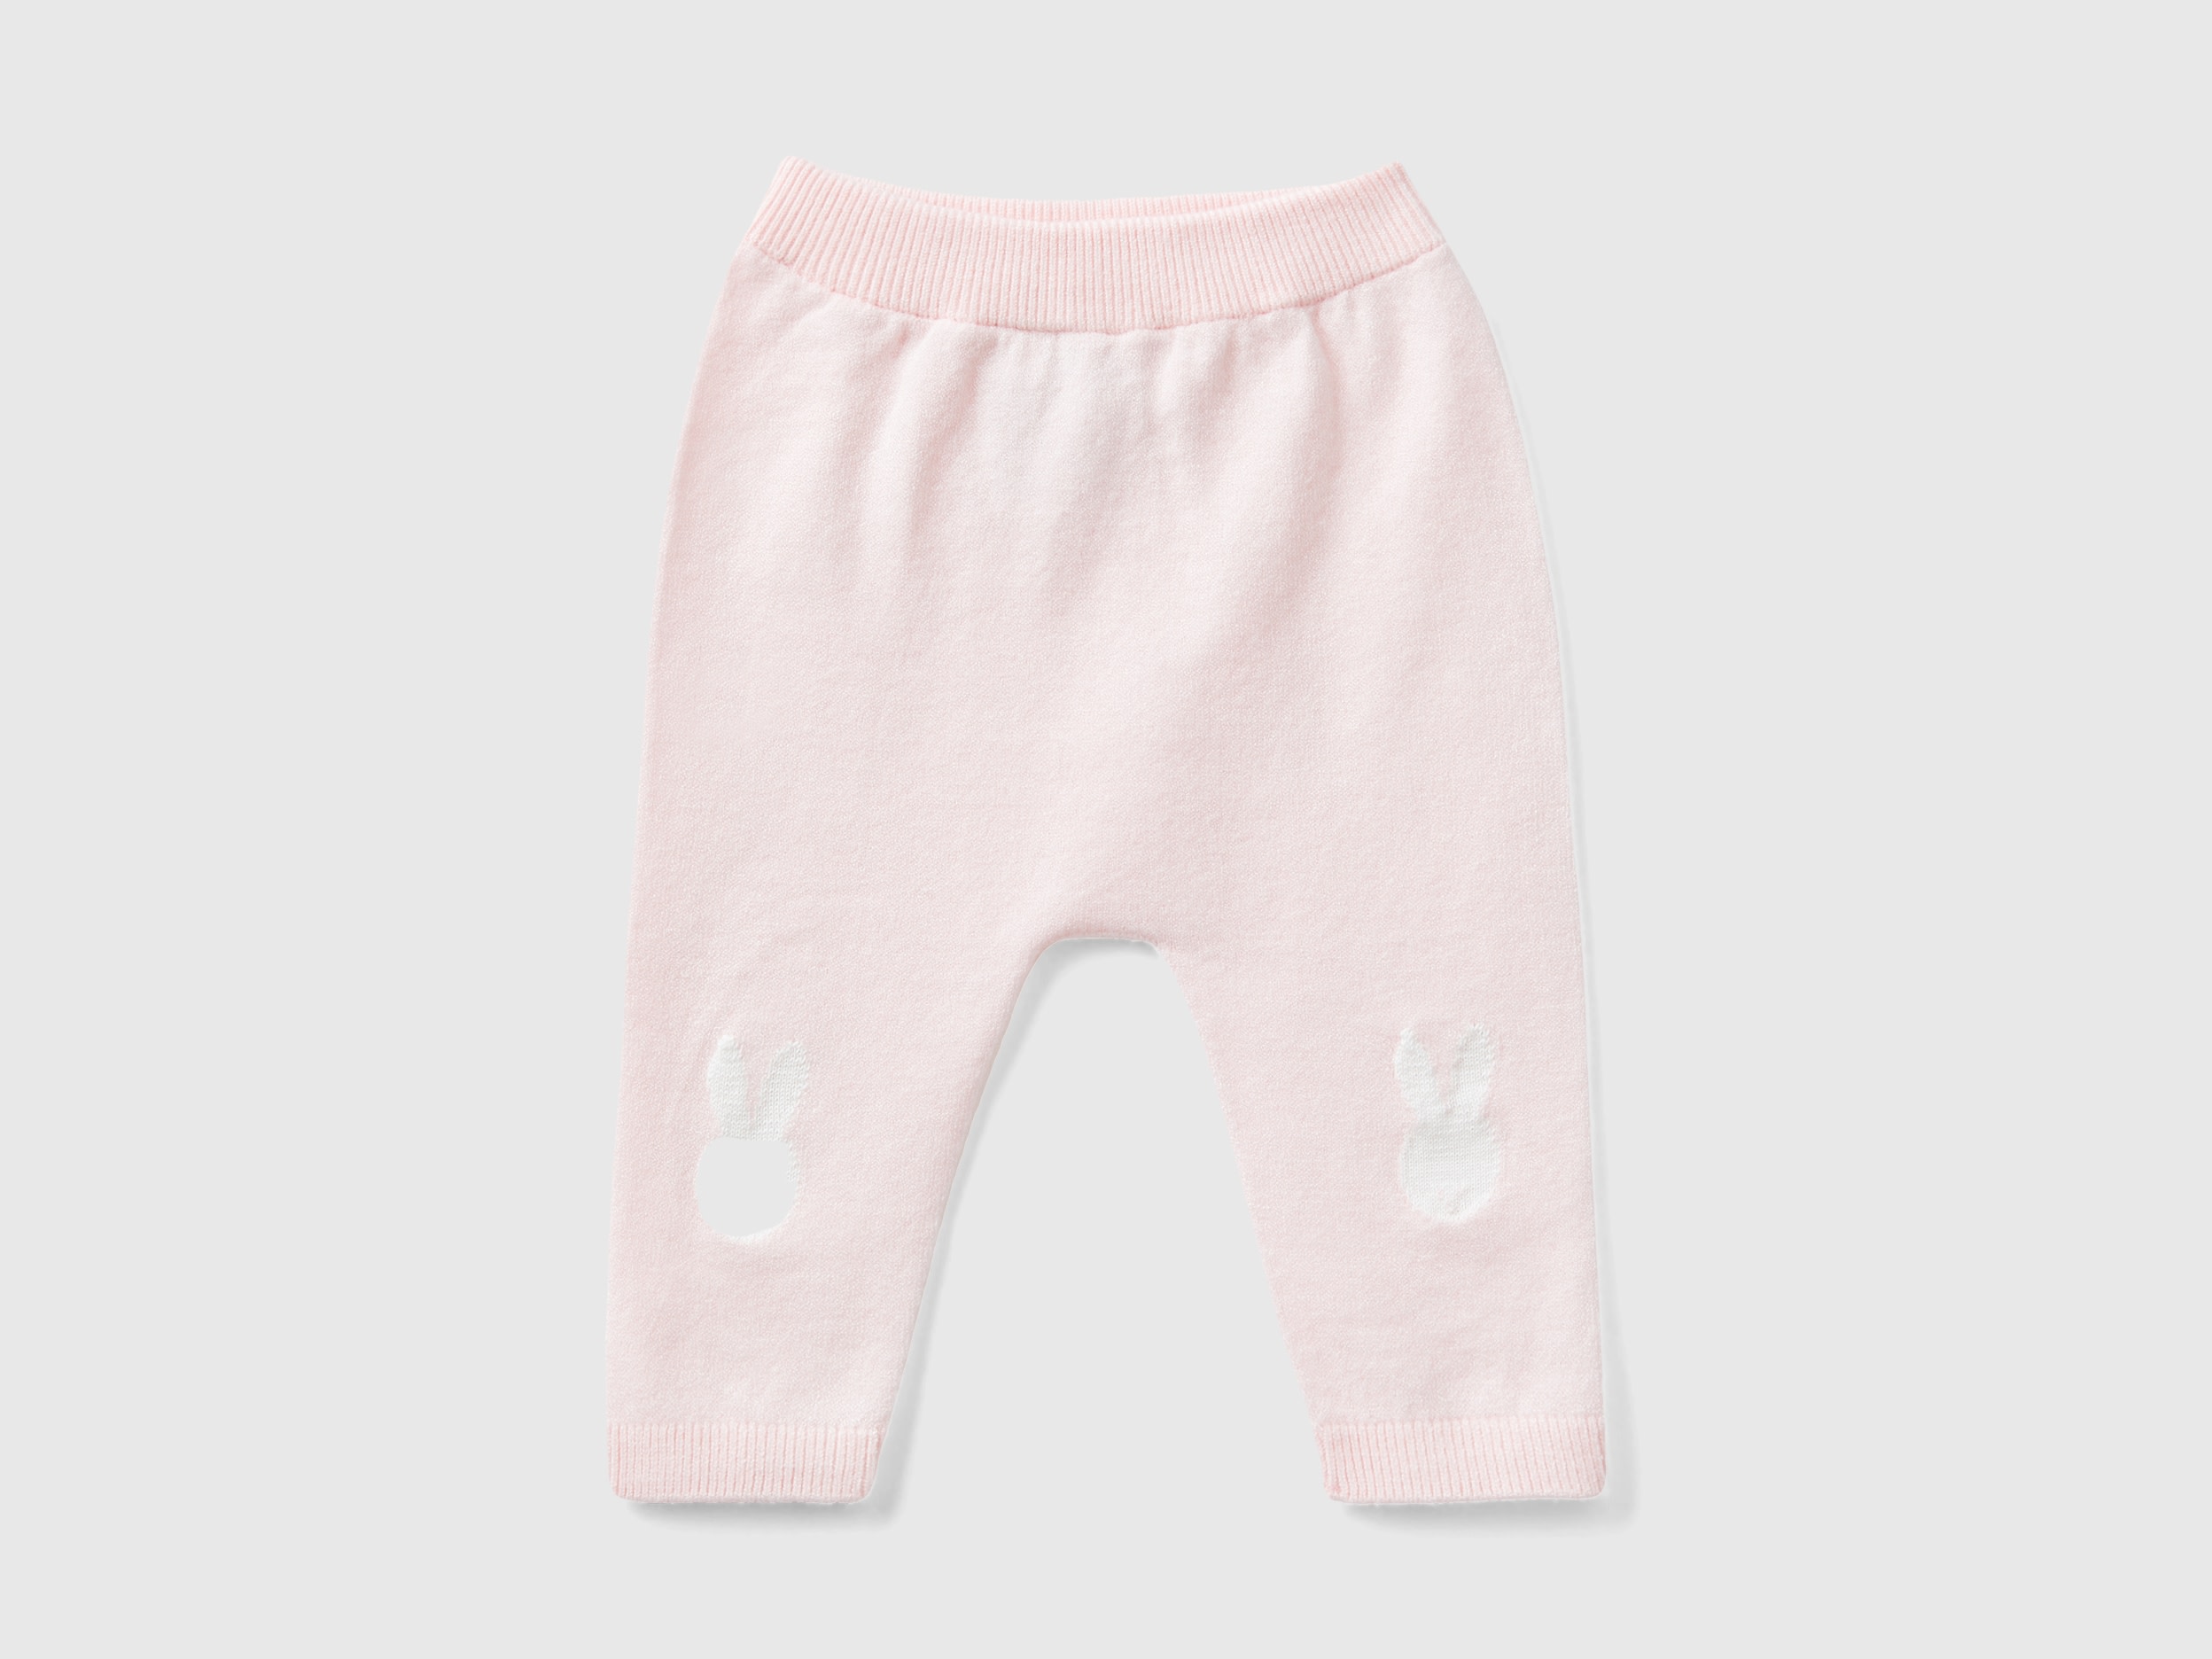 Benetton, Knit Trousers With Inlay, size 1-3, Soft Pink, Kids